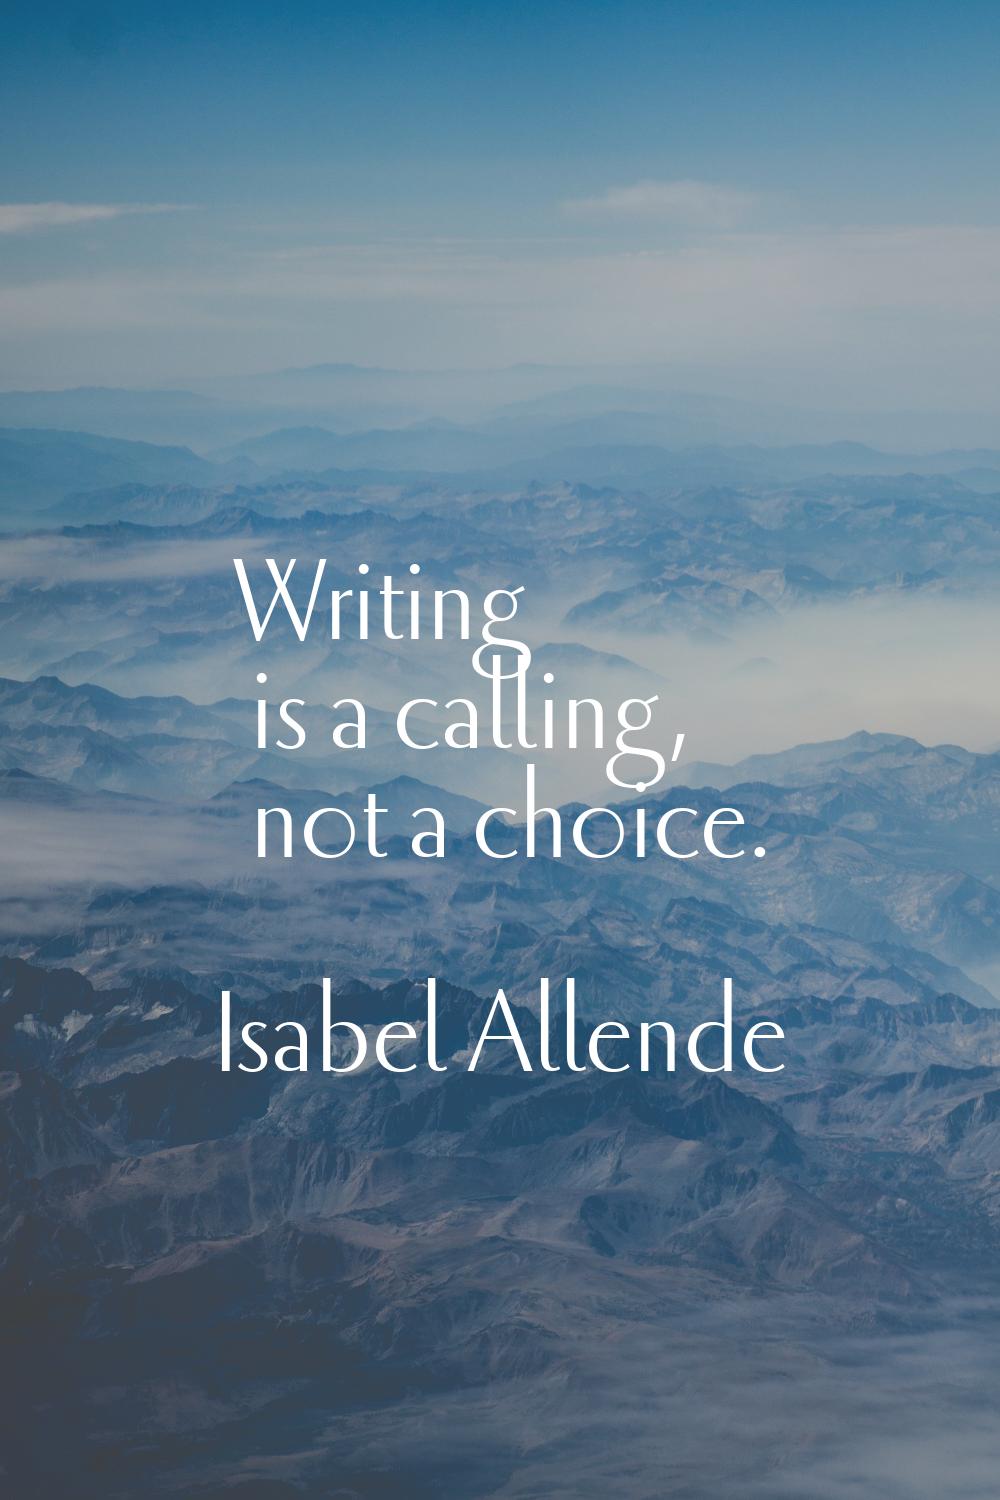 Writing is a calling, not a choice.